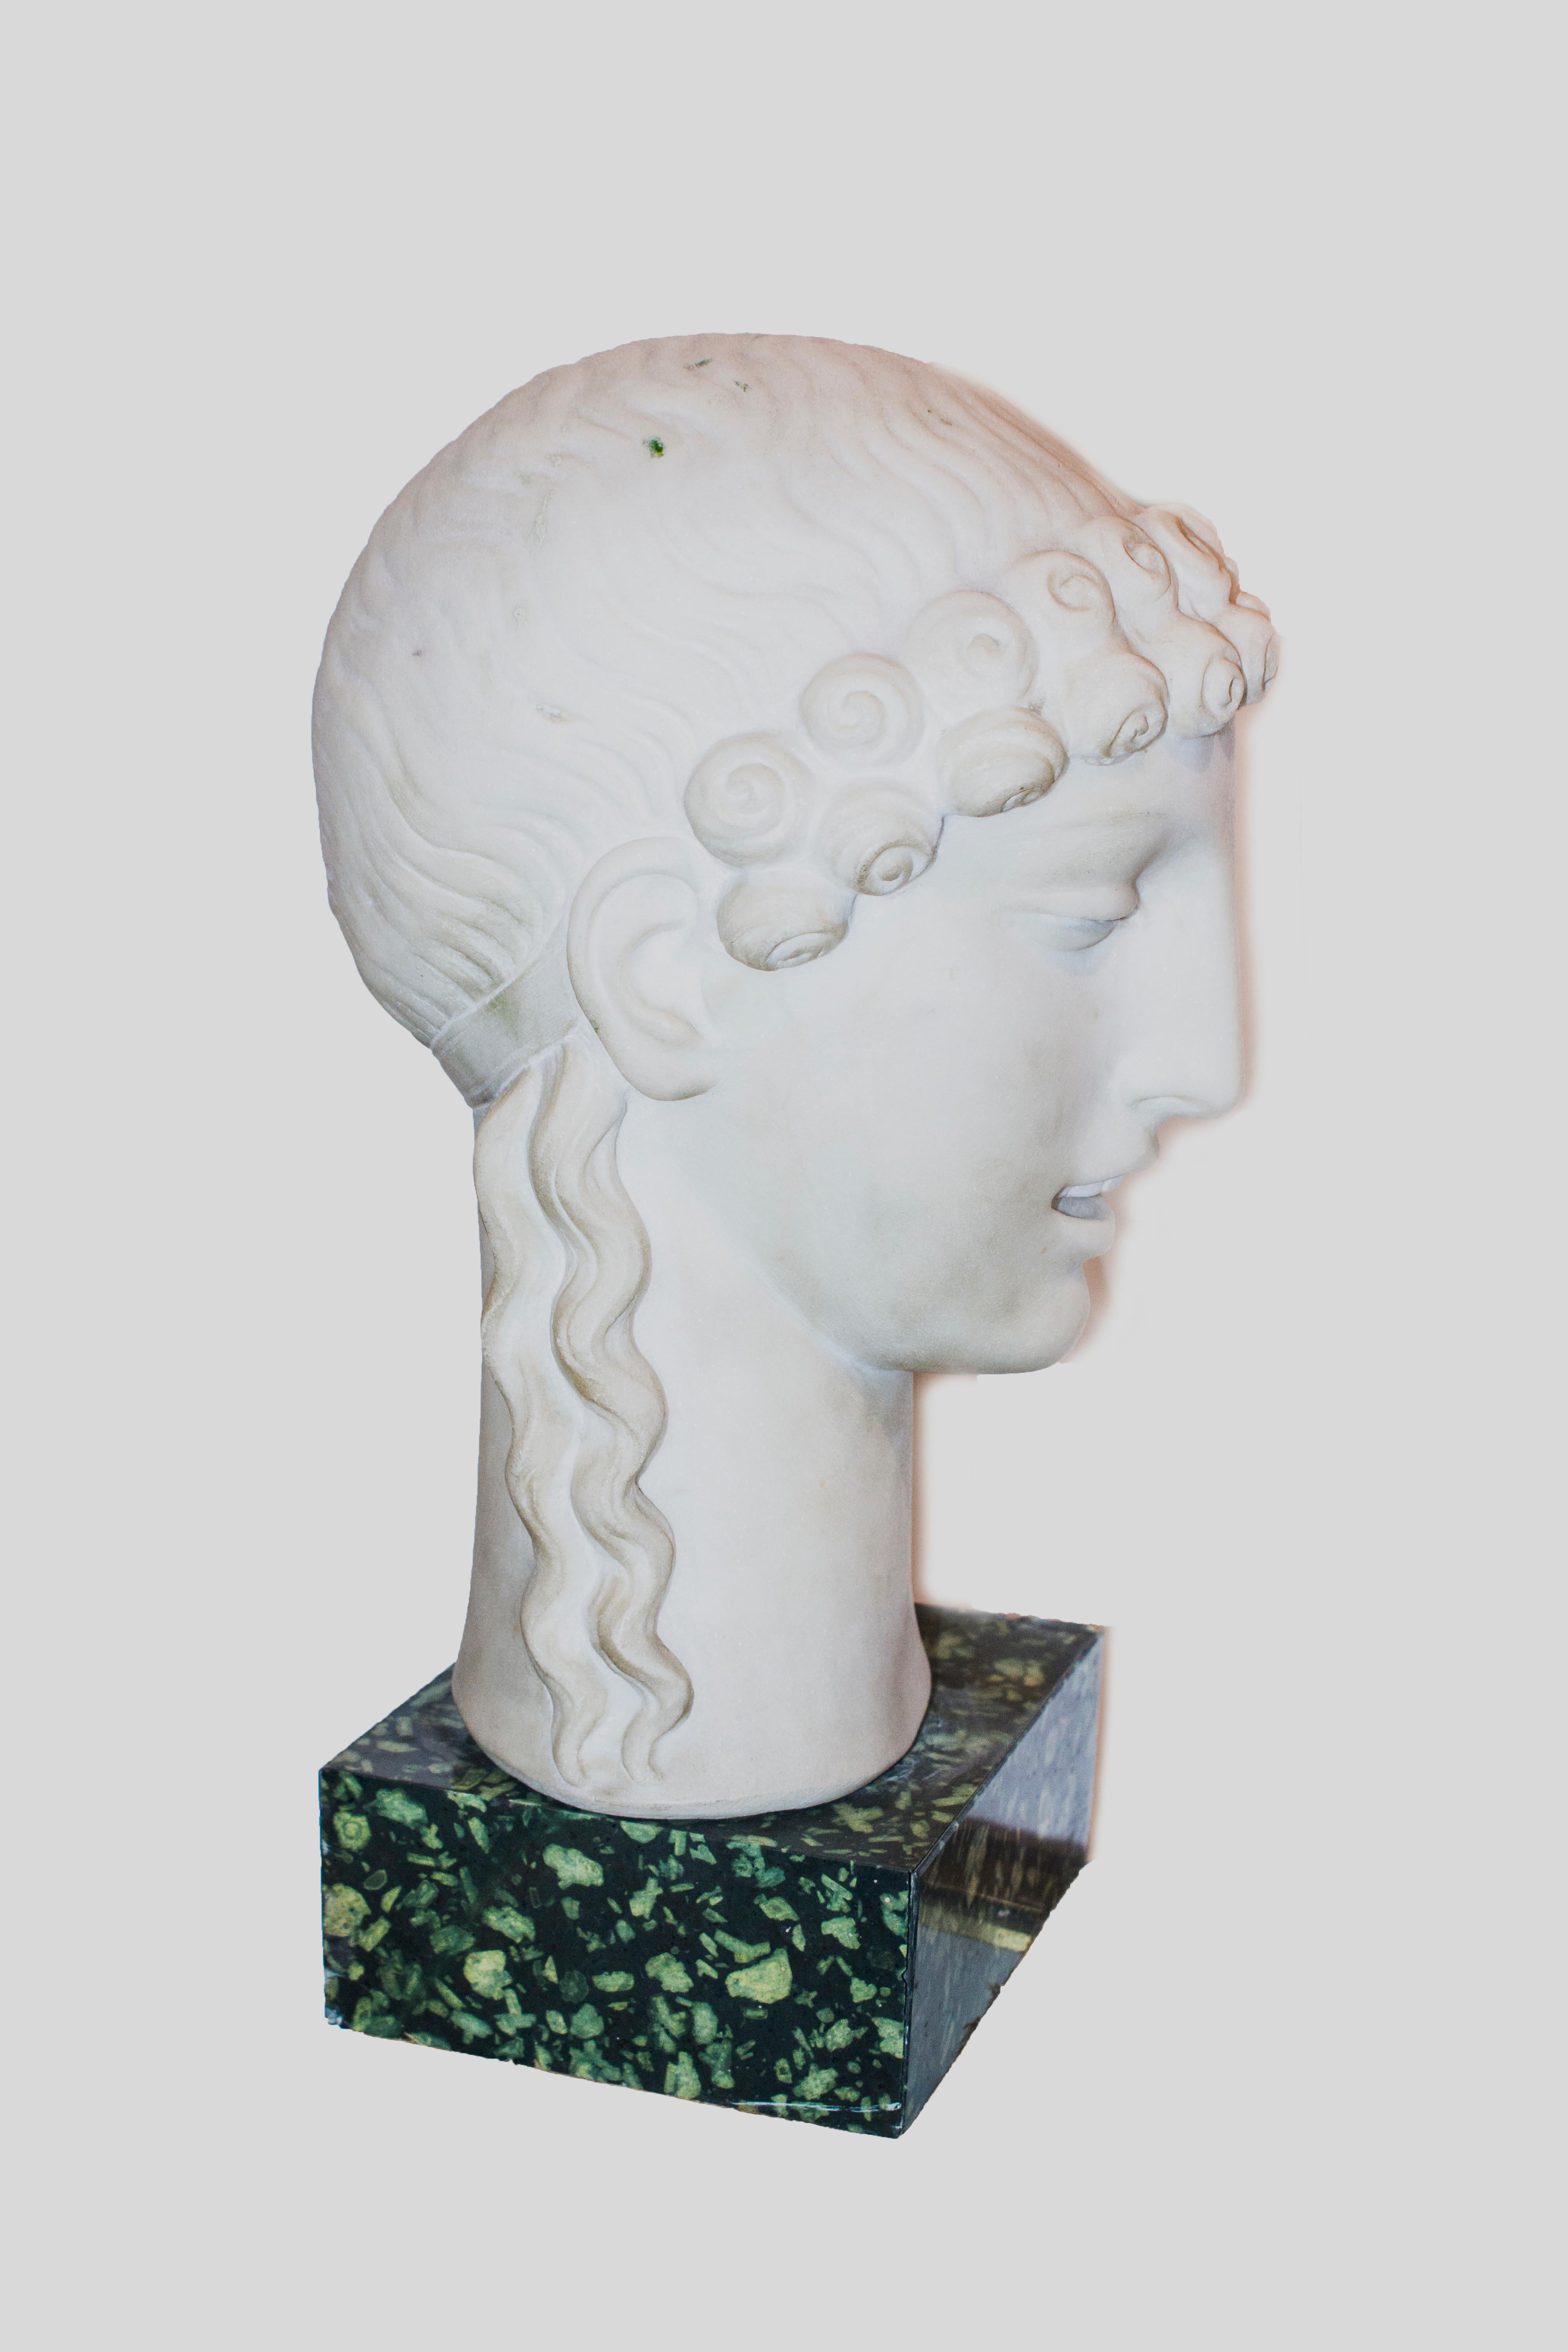 Marble sculpture representing two Kore’s head with a serpentine marble bottom. Both signed behind the head by D’Antino.
Nicola D'Antino was an Italian sculptor and was a student and friend of Francesco Paolo Michetti. He attended the Academy of